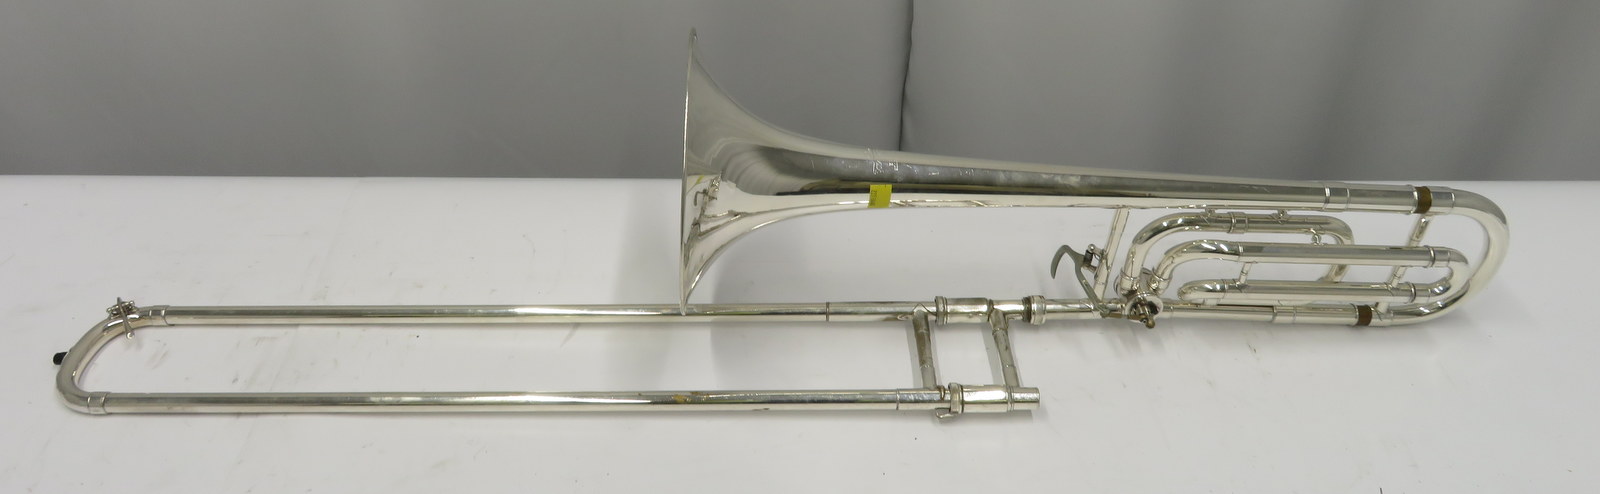 Bach Stradivarius model 42 trombone with case. Serial number: 96593. - Image 4 of 18